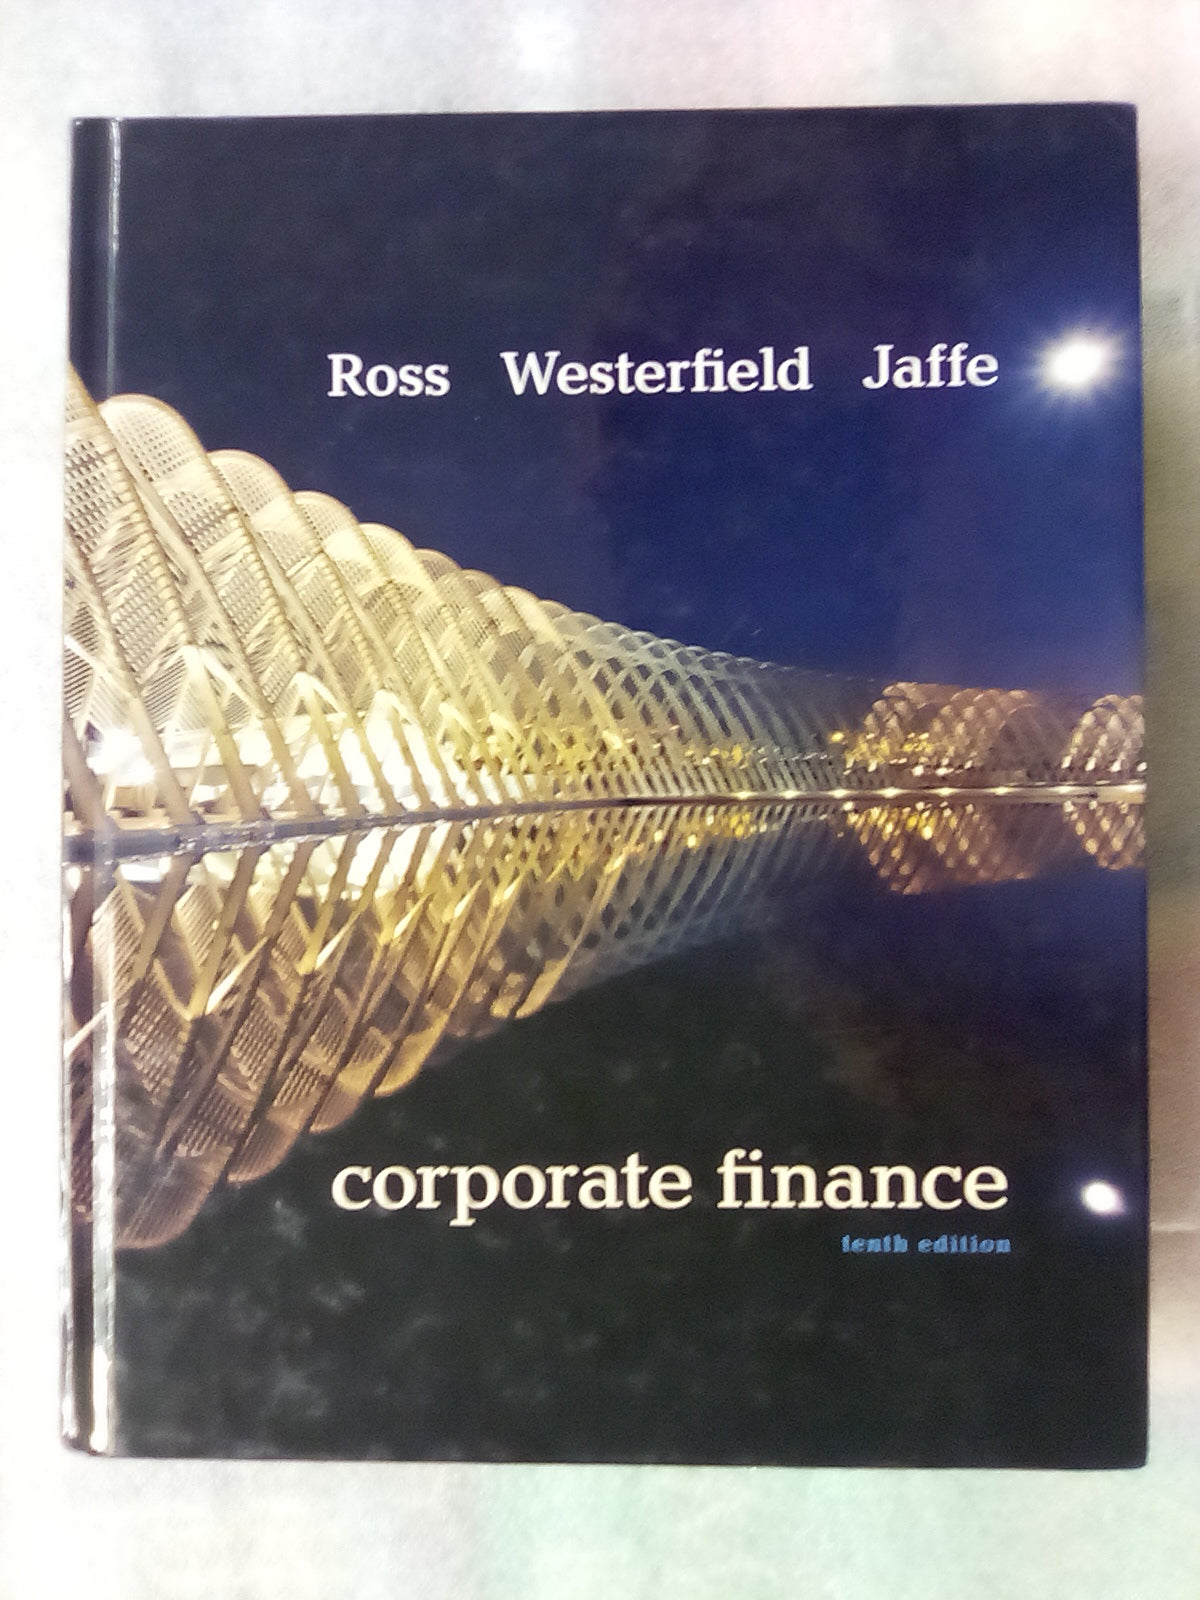 Corporate Finance 10th. Edition by Ross, Westerfield, and Jaffe